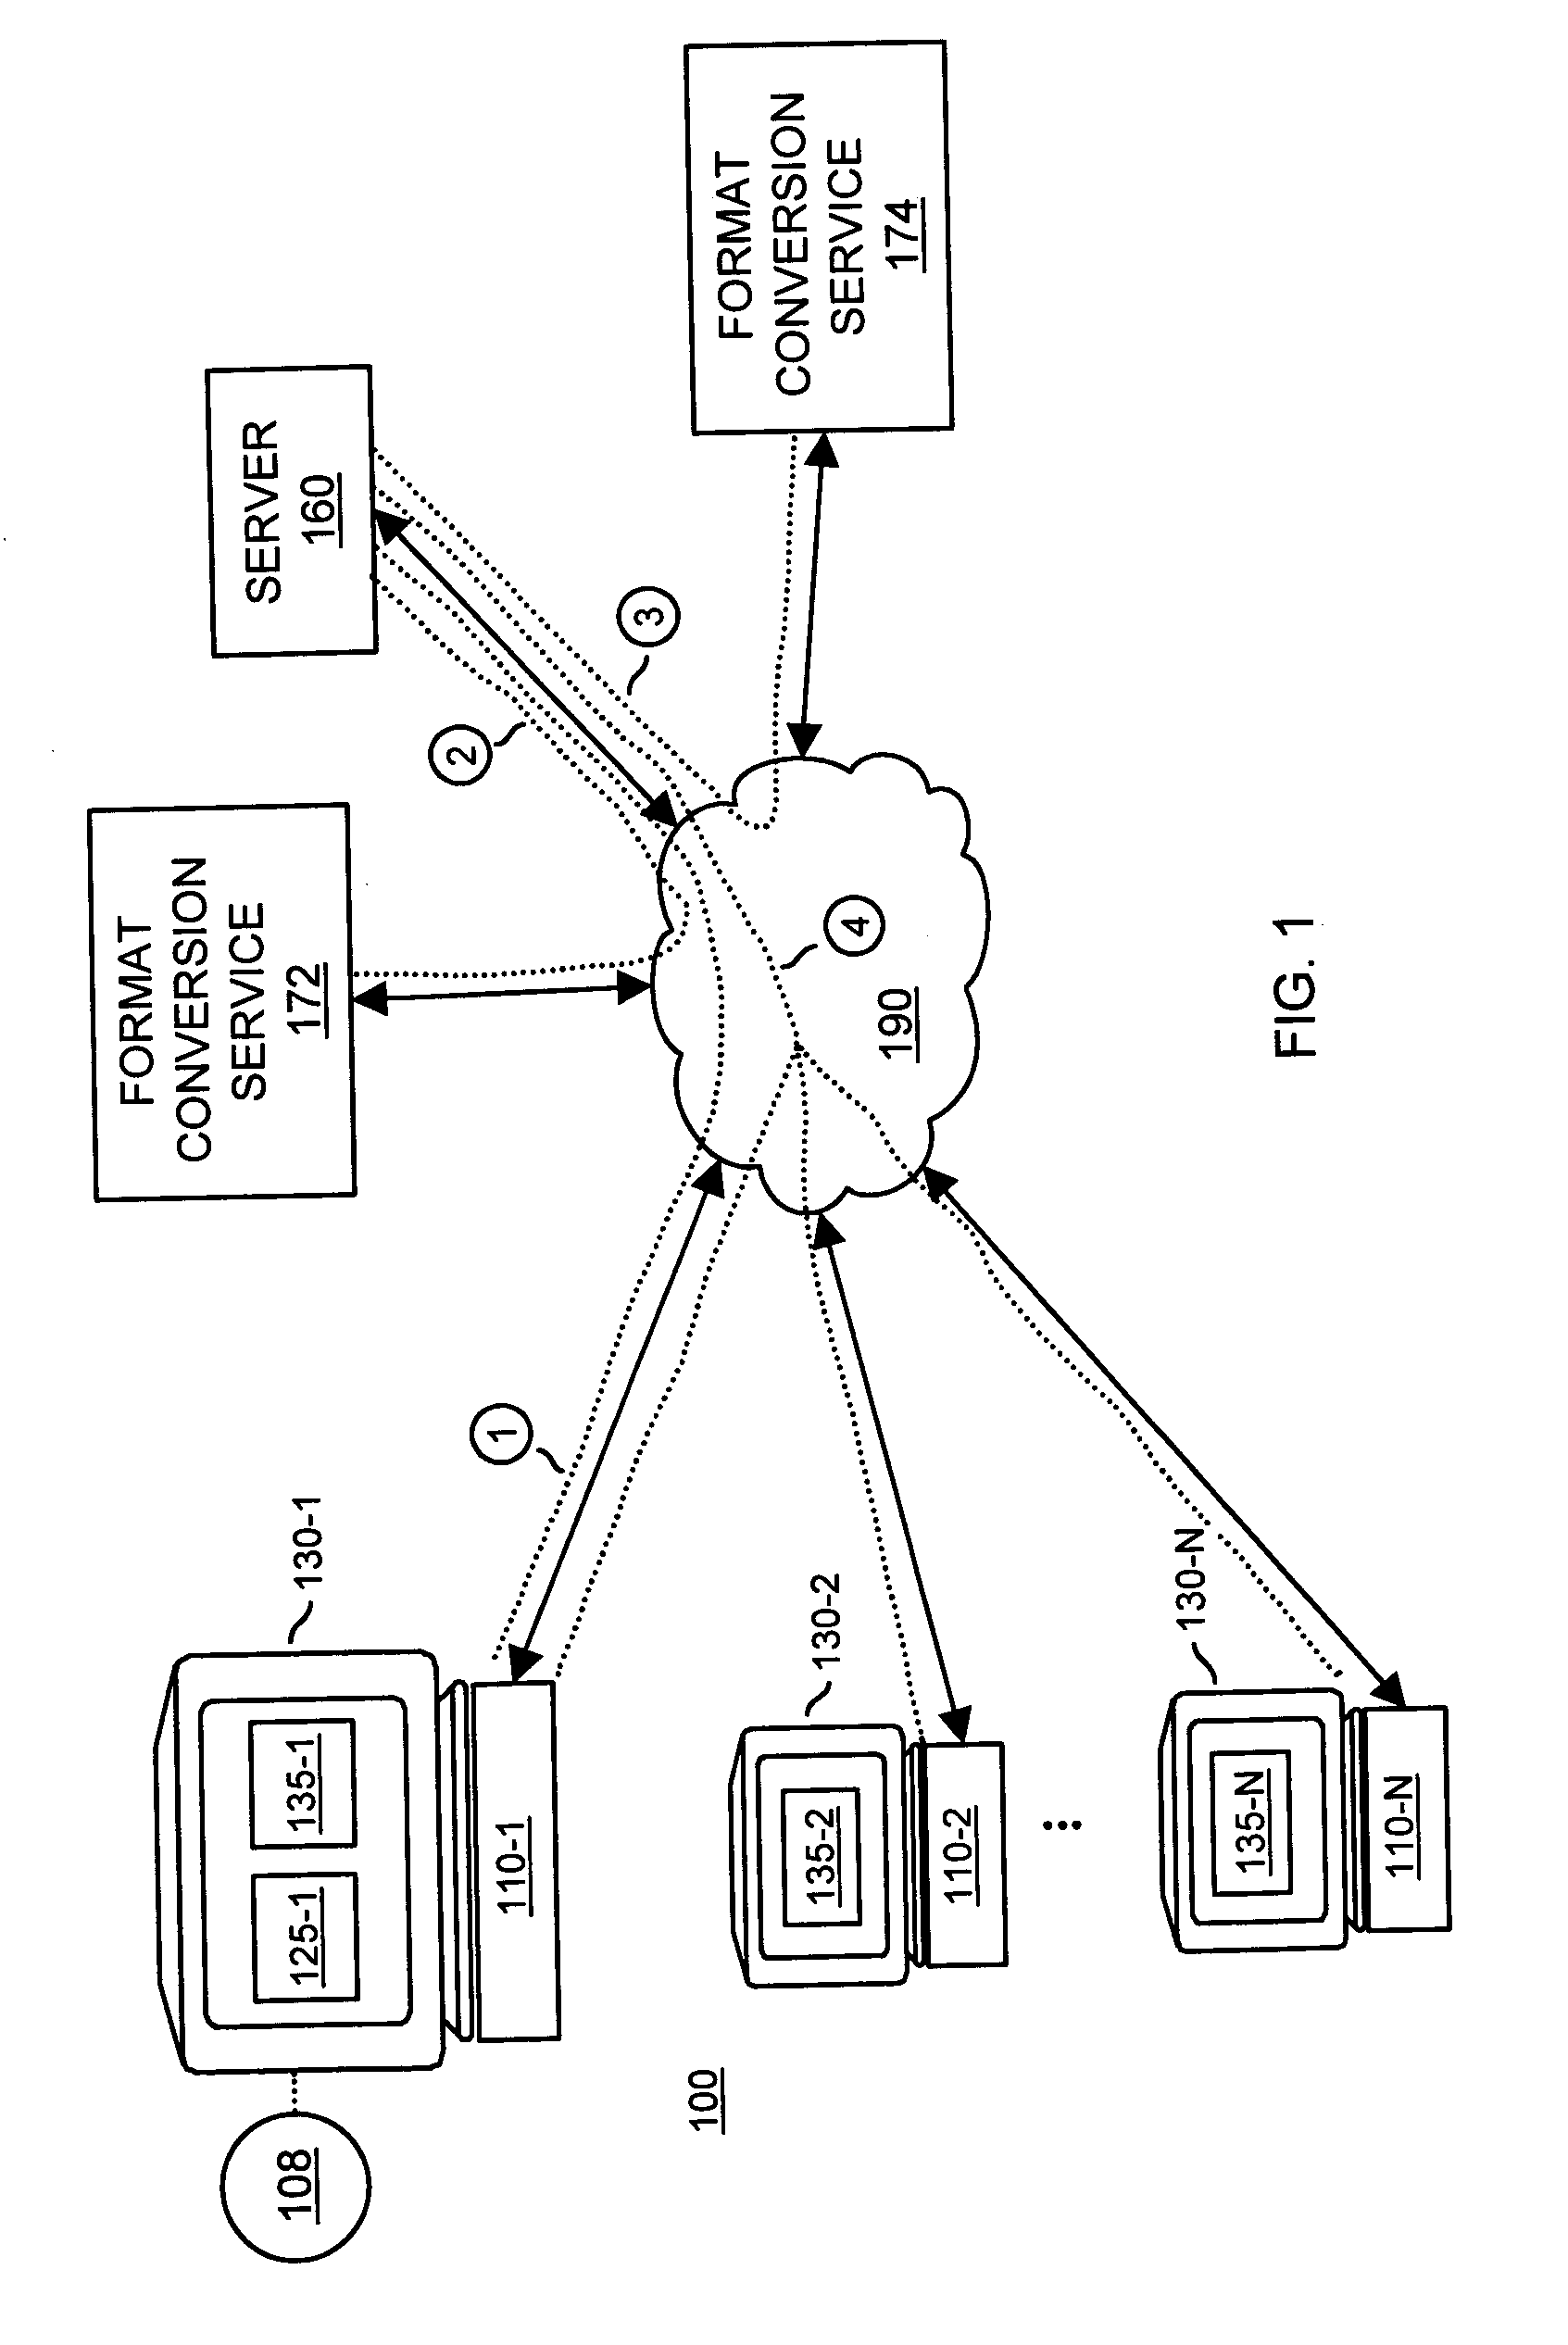 Methods and apparatus to reformat and distribute content